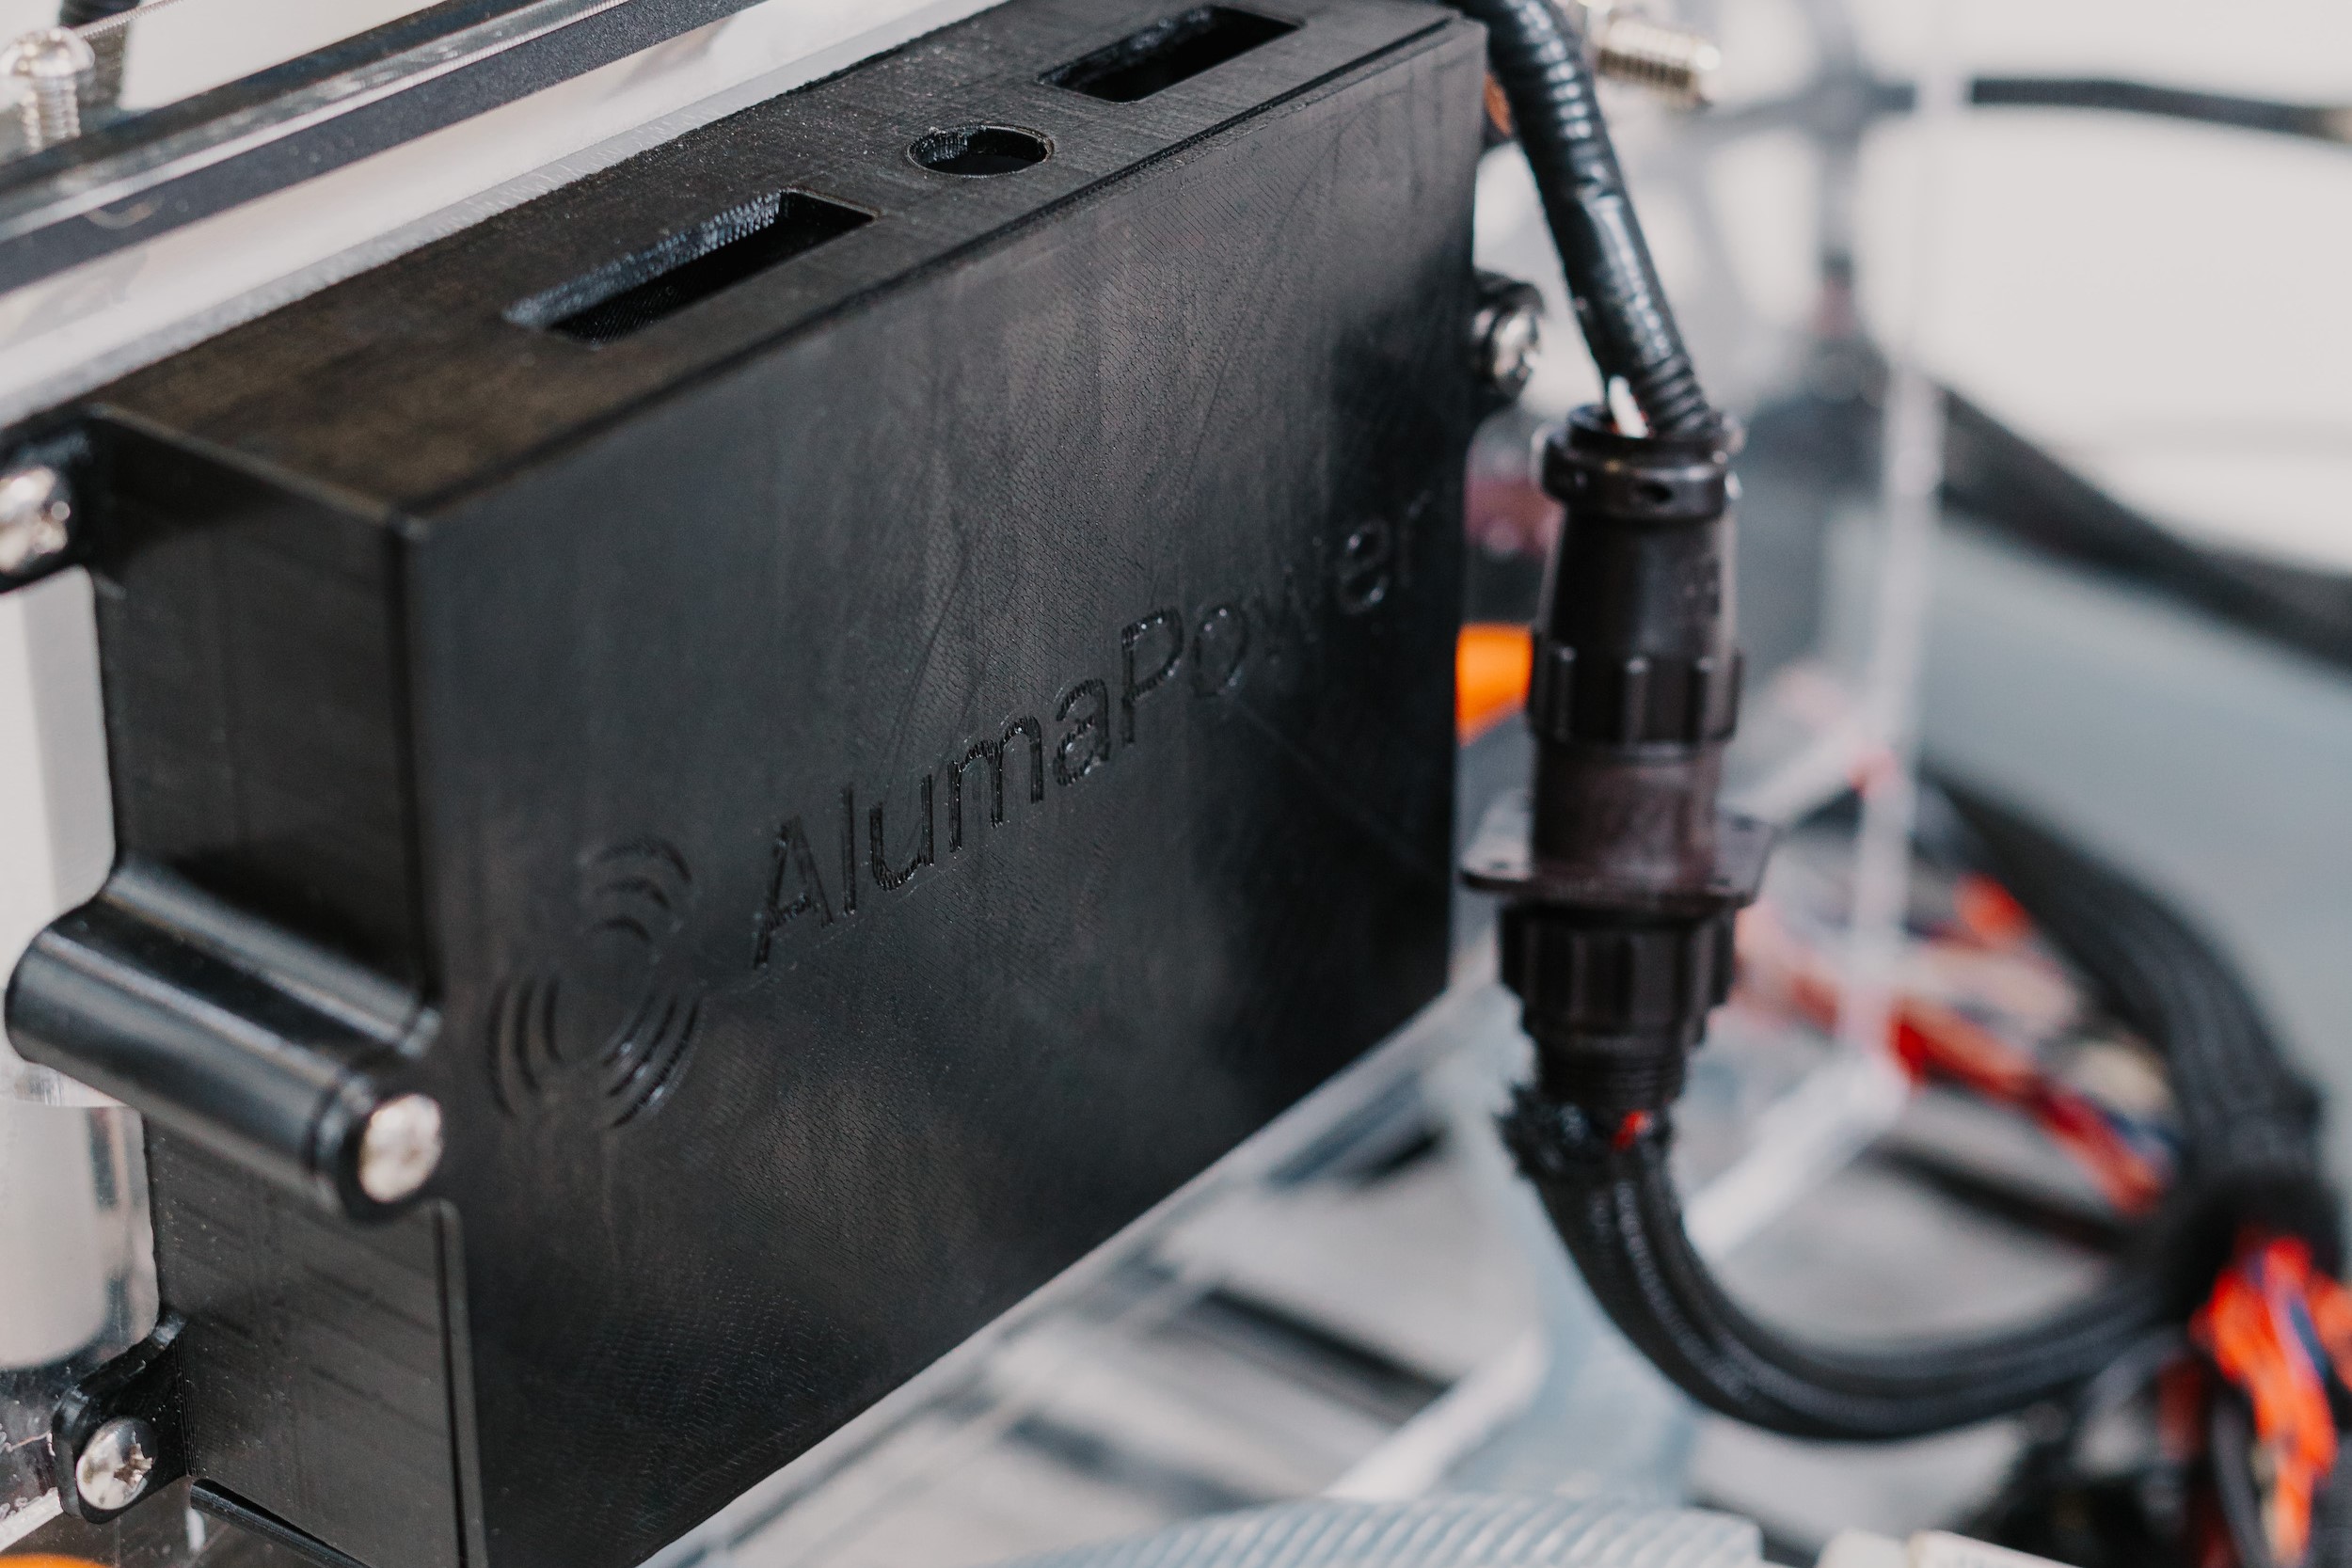 Close up of an engineering project with the AlumaPower logo